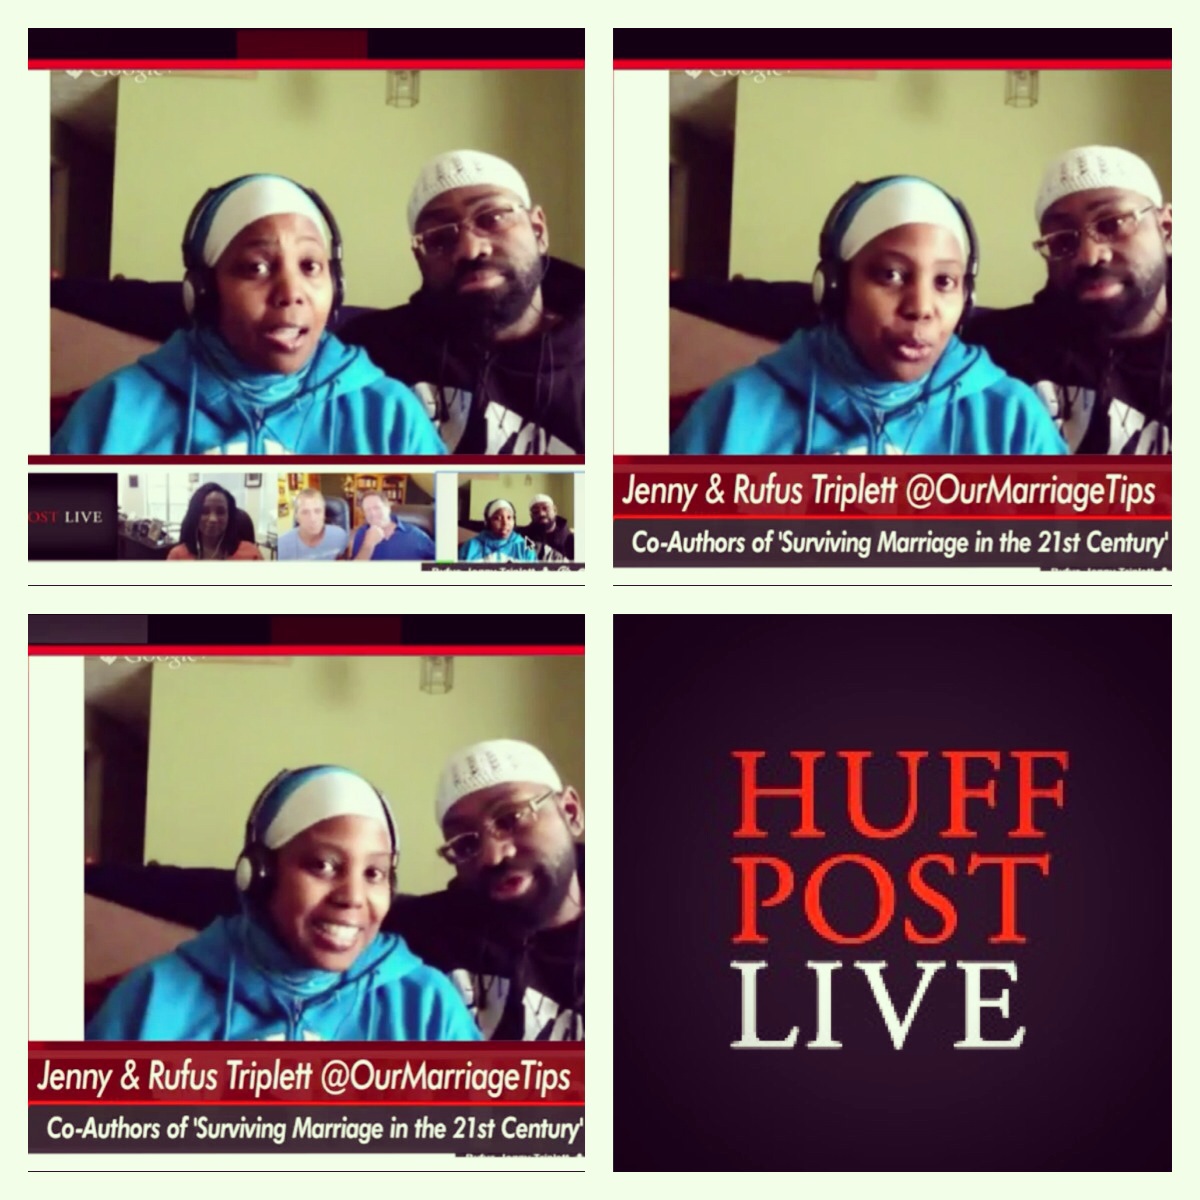 Jenny and Rufus go viral on Huff Post Live